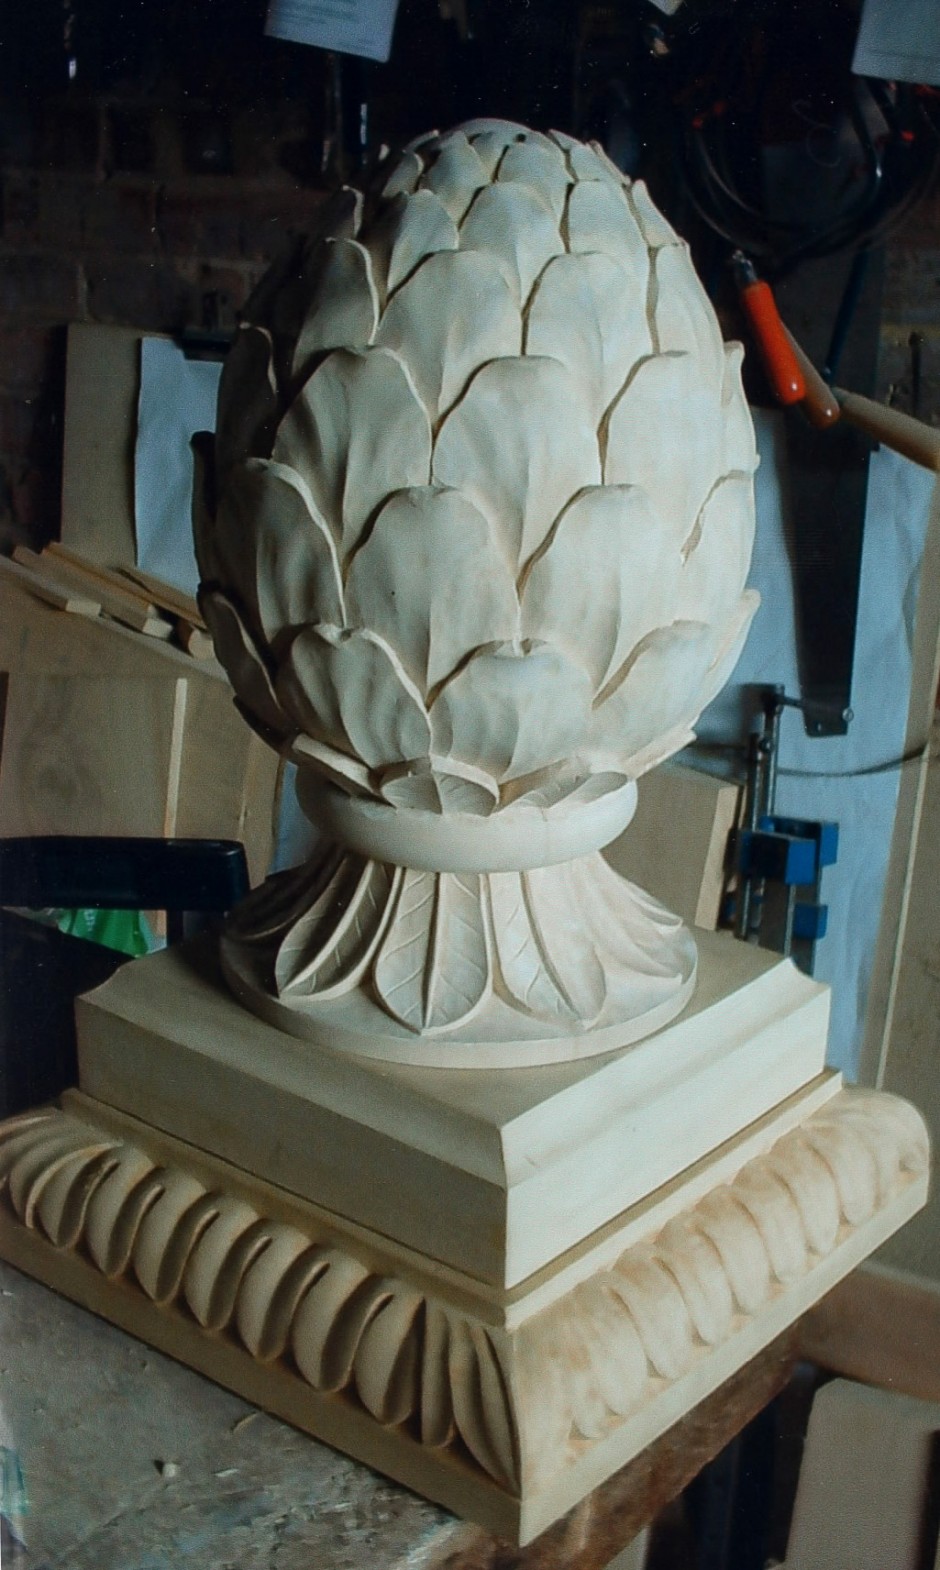 The finished carving on its base - pineapple, base, ornament